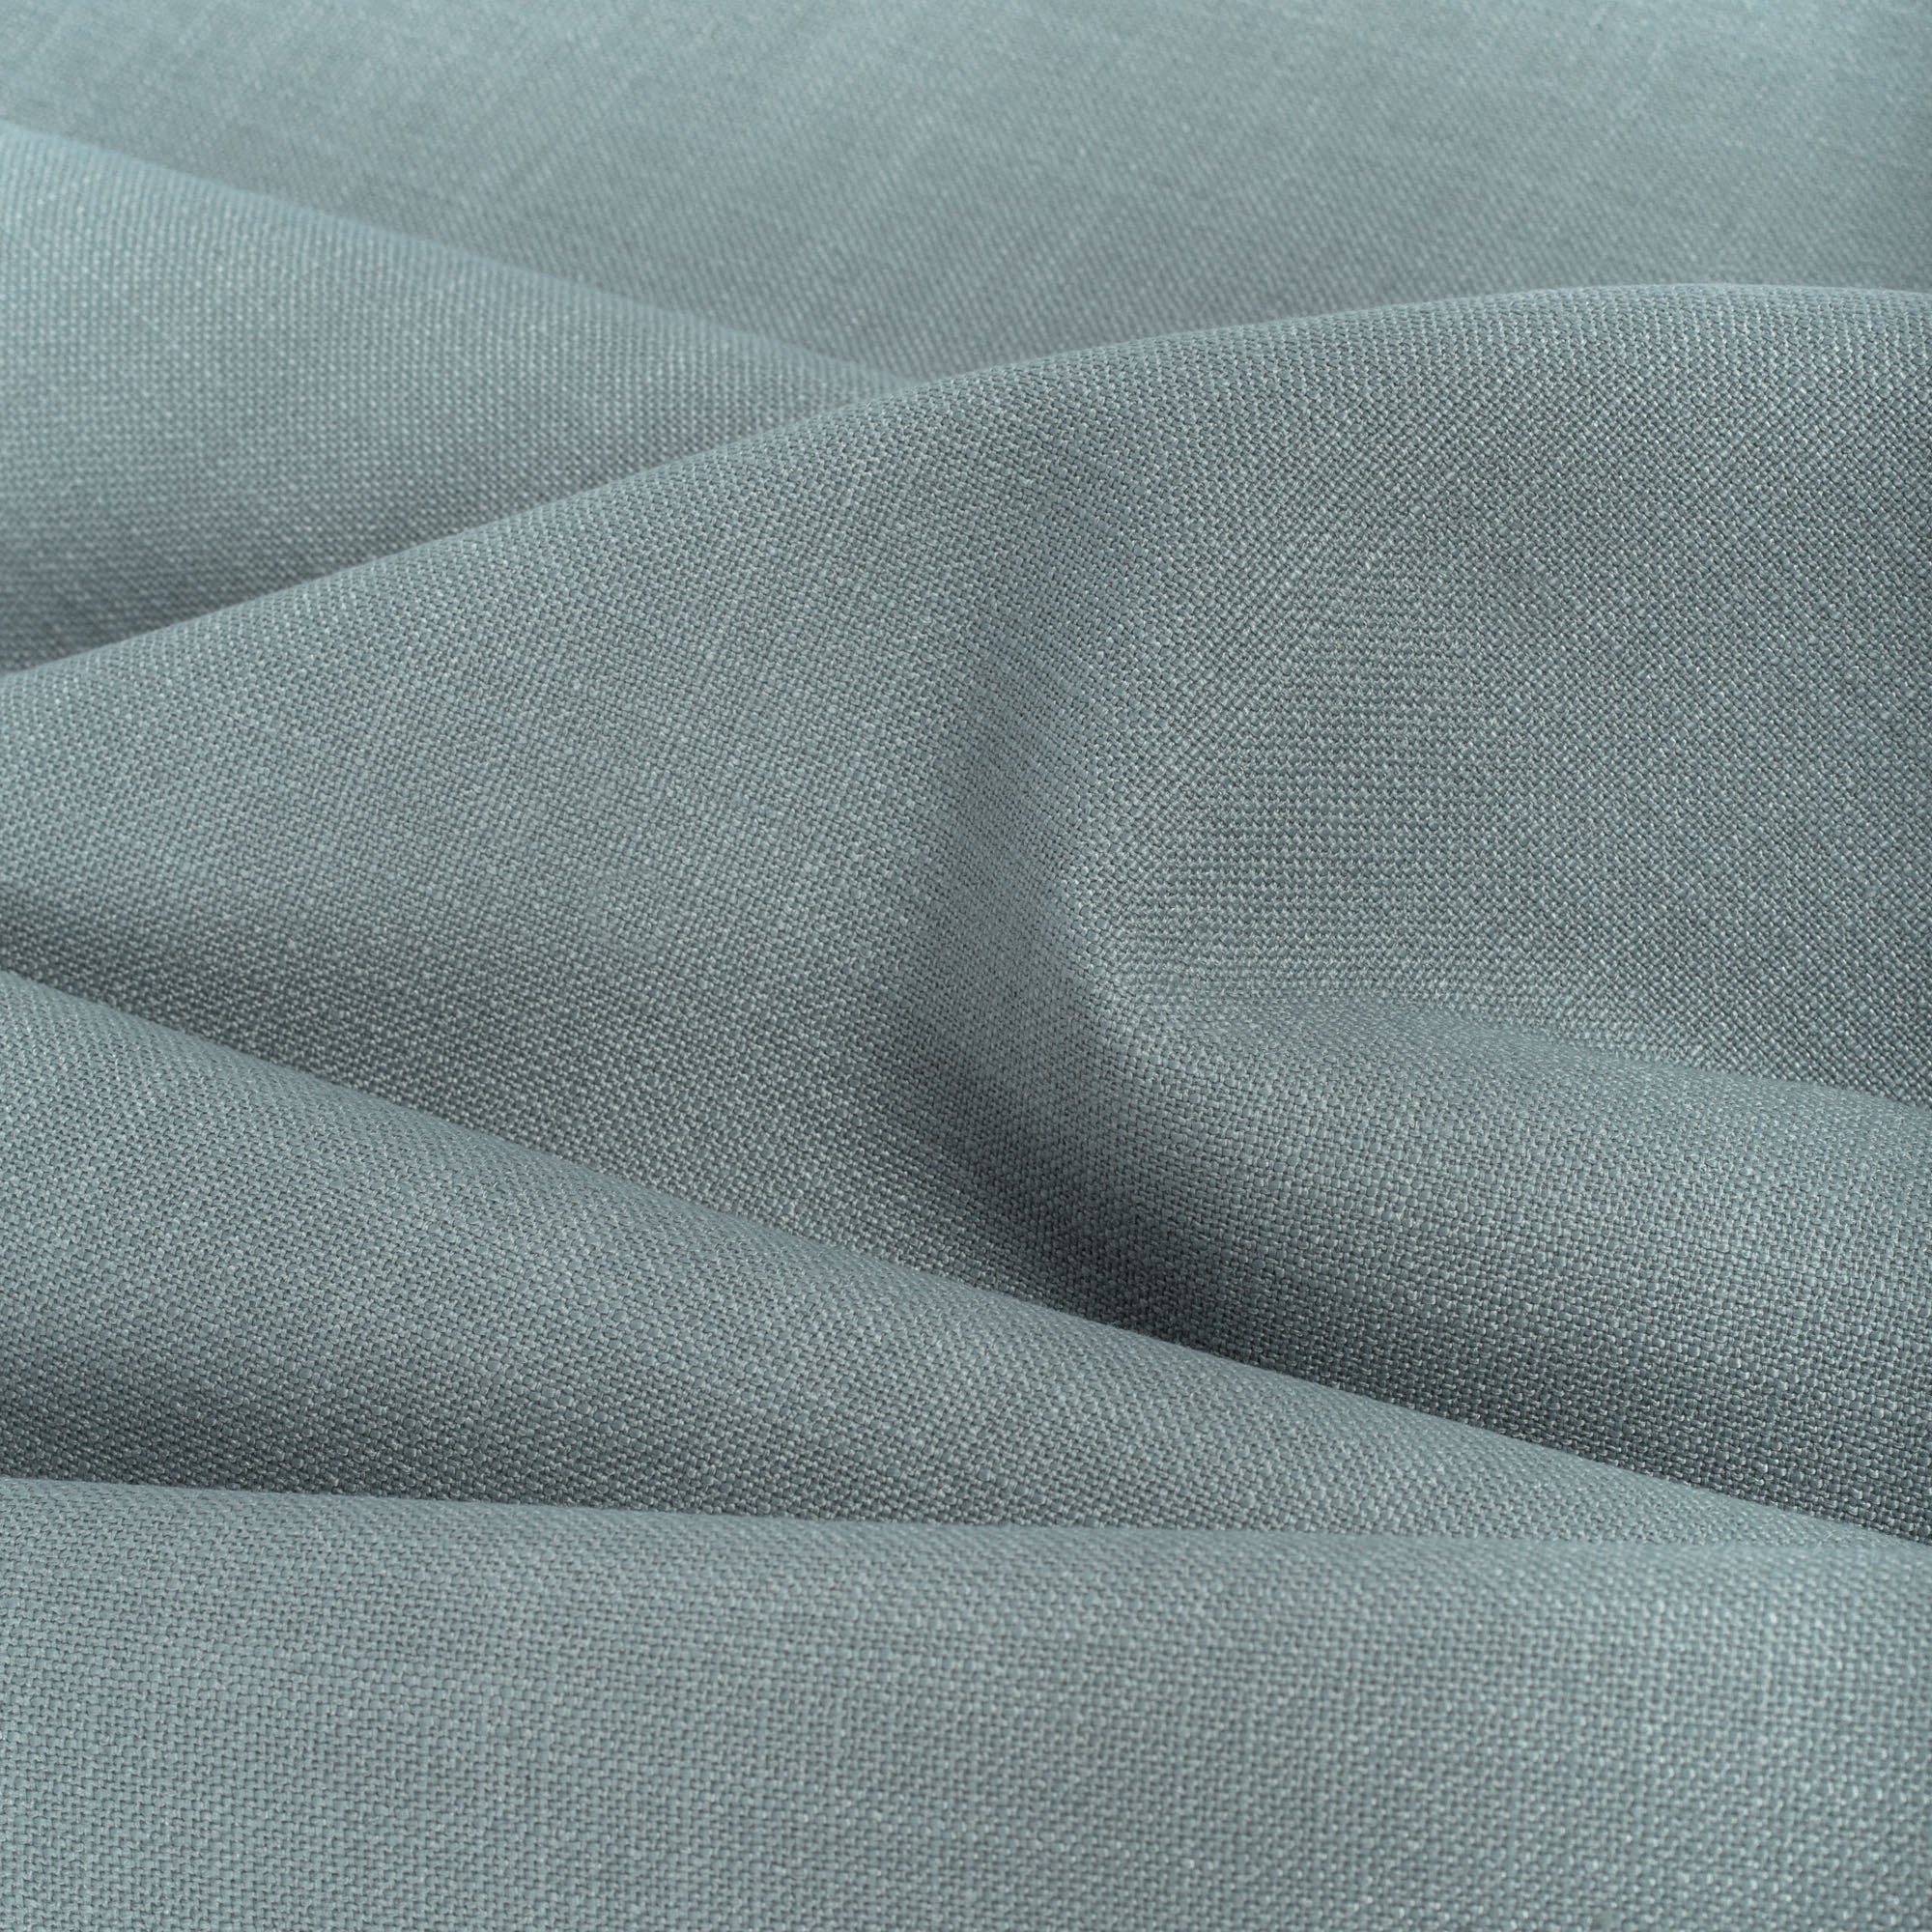 Grange Fabric Seaspray, a watery blue high performance upholstery fabric with a subtle textural weave from Tonic Living